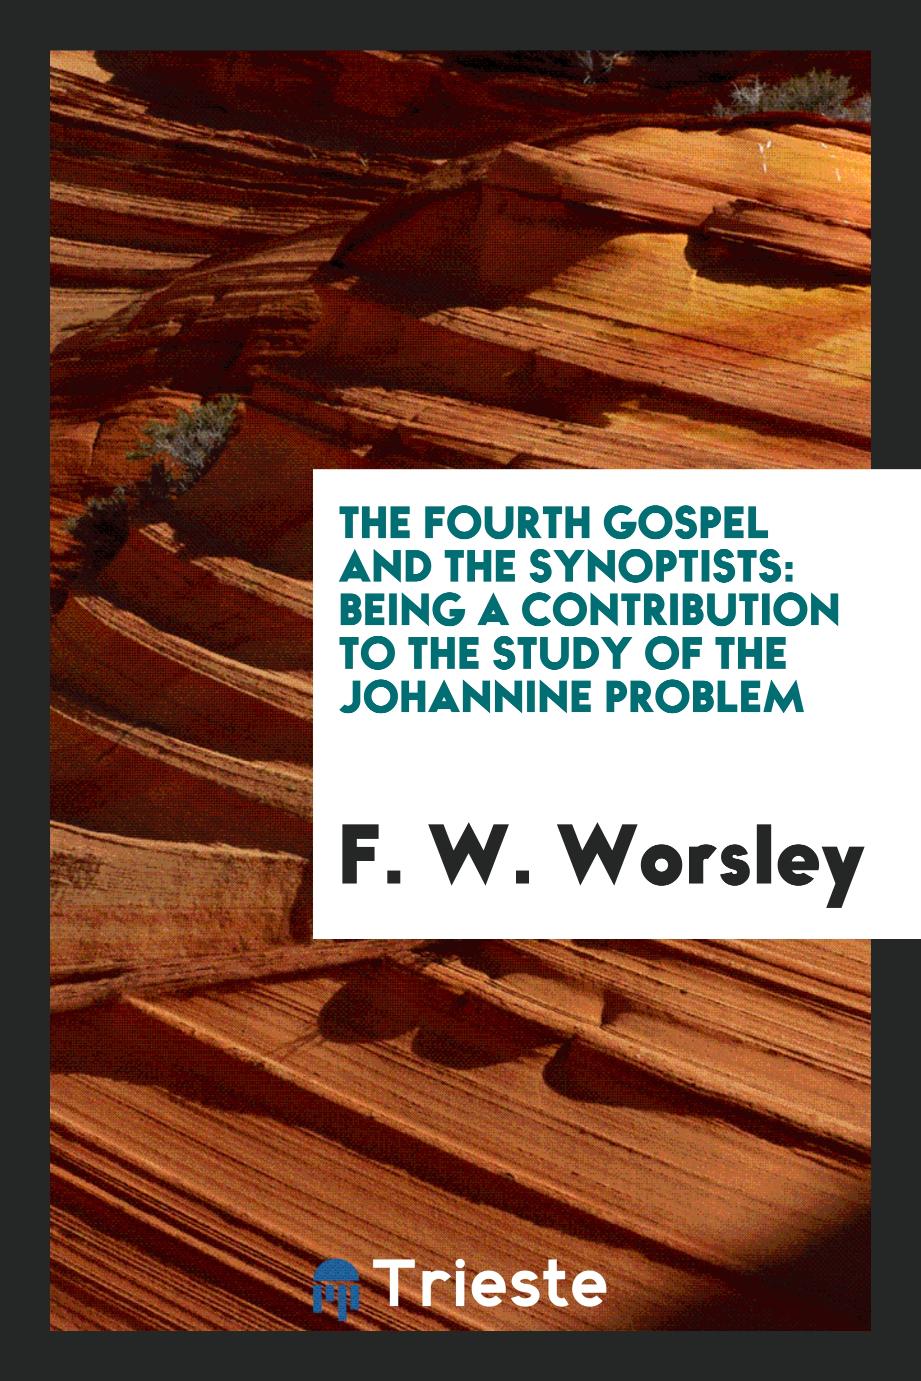 The fourth gospel and the synoptists: being a contribution to the study of the Johannine problem